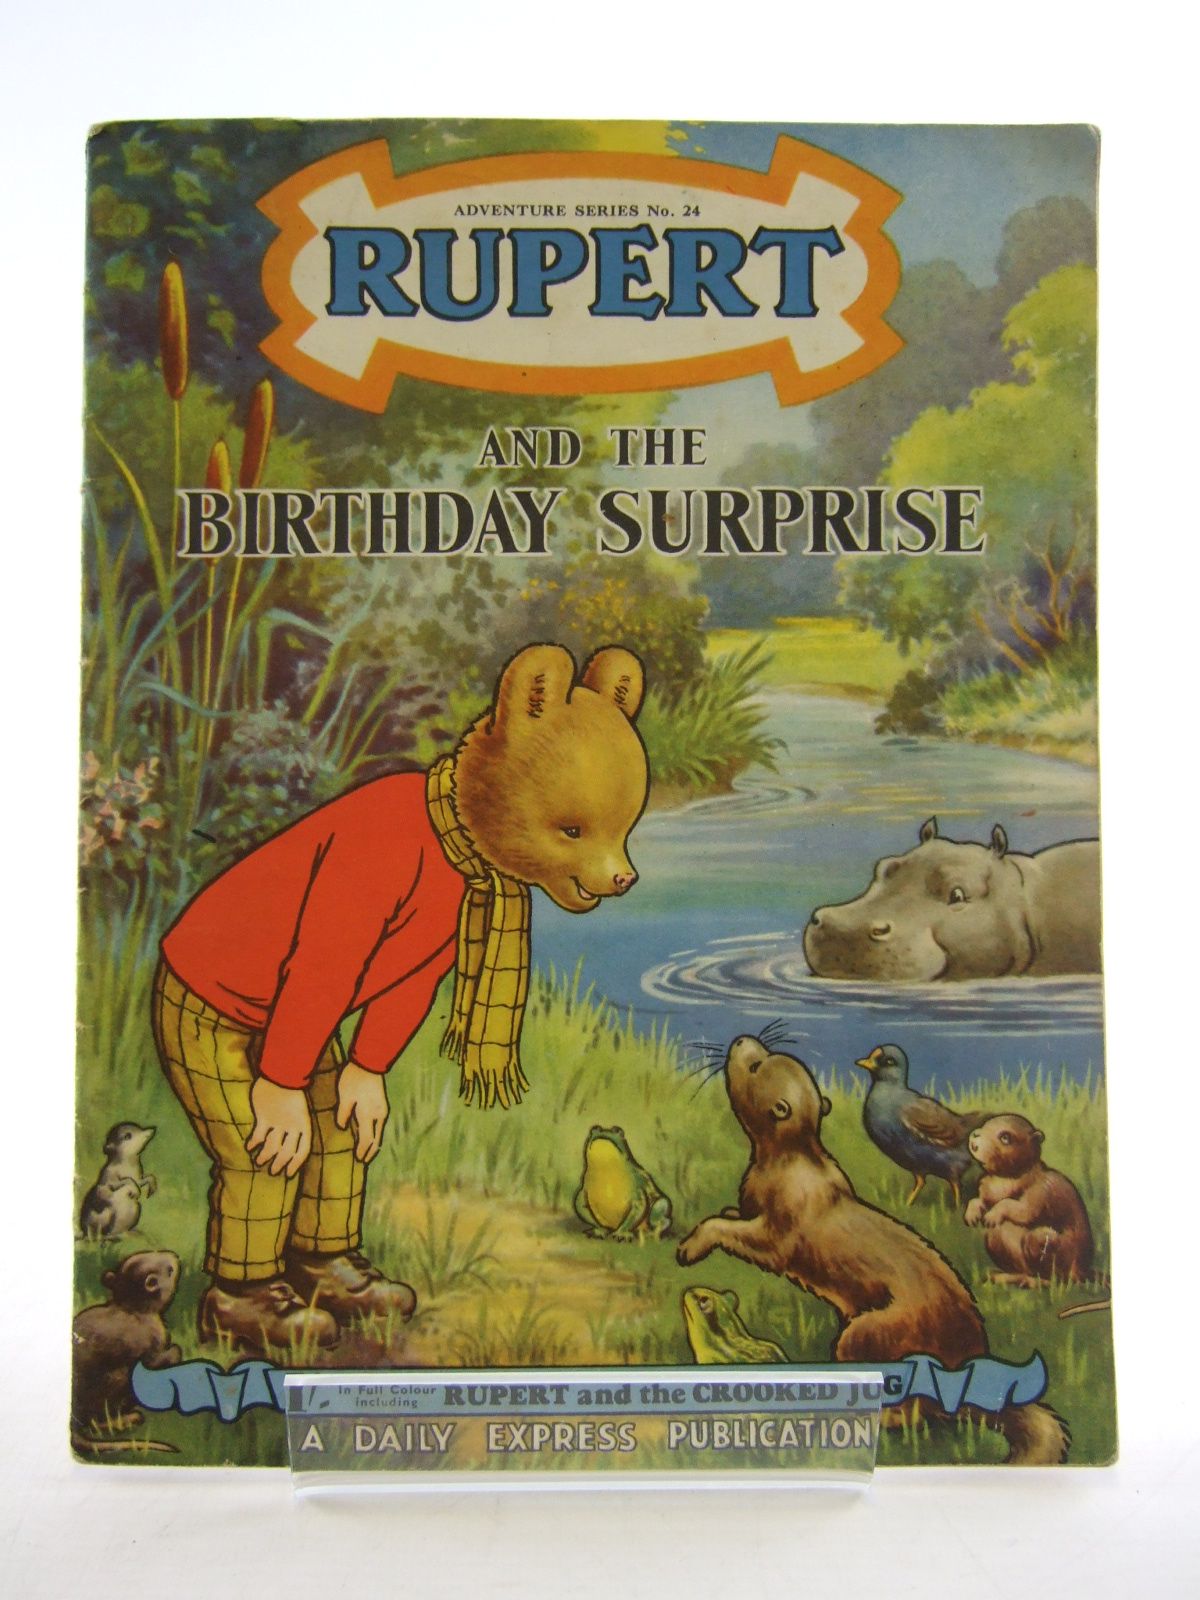 Photo of RUPERT ADVENTURE SERIES No. 24 - RUPERT AND THE BIRTHDAY SURPRISE written by Bestall, Alfred published by Daily Express (STOCK CODE: 1805370)  for sale by Stella & Rose's Books